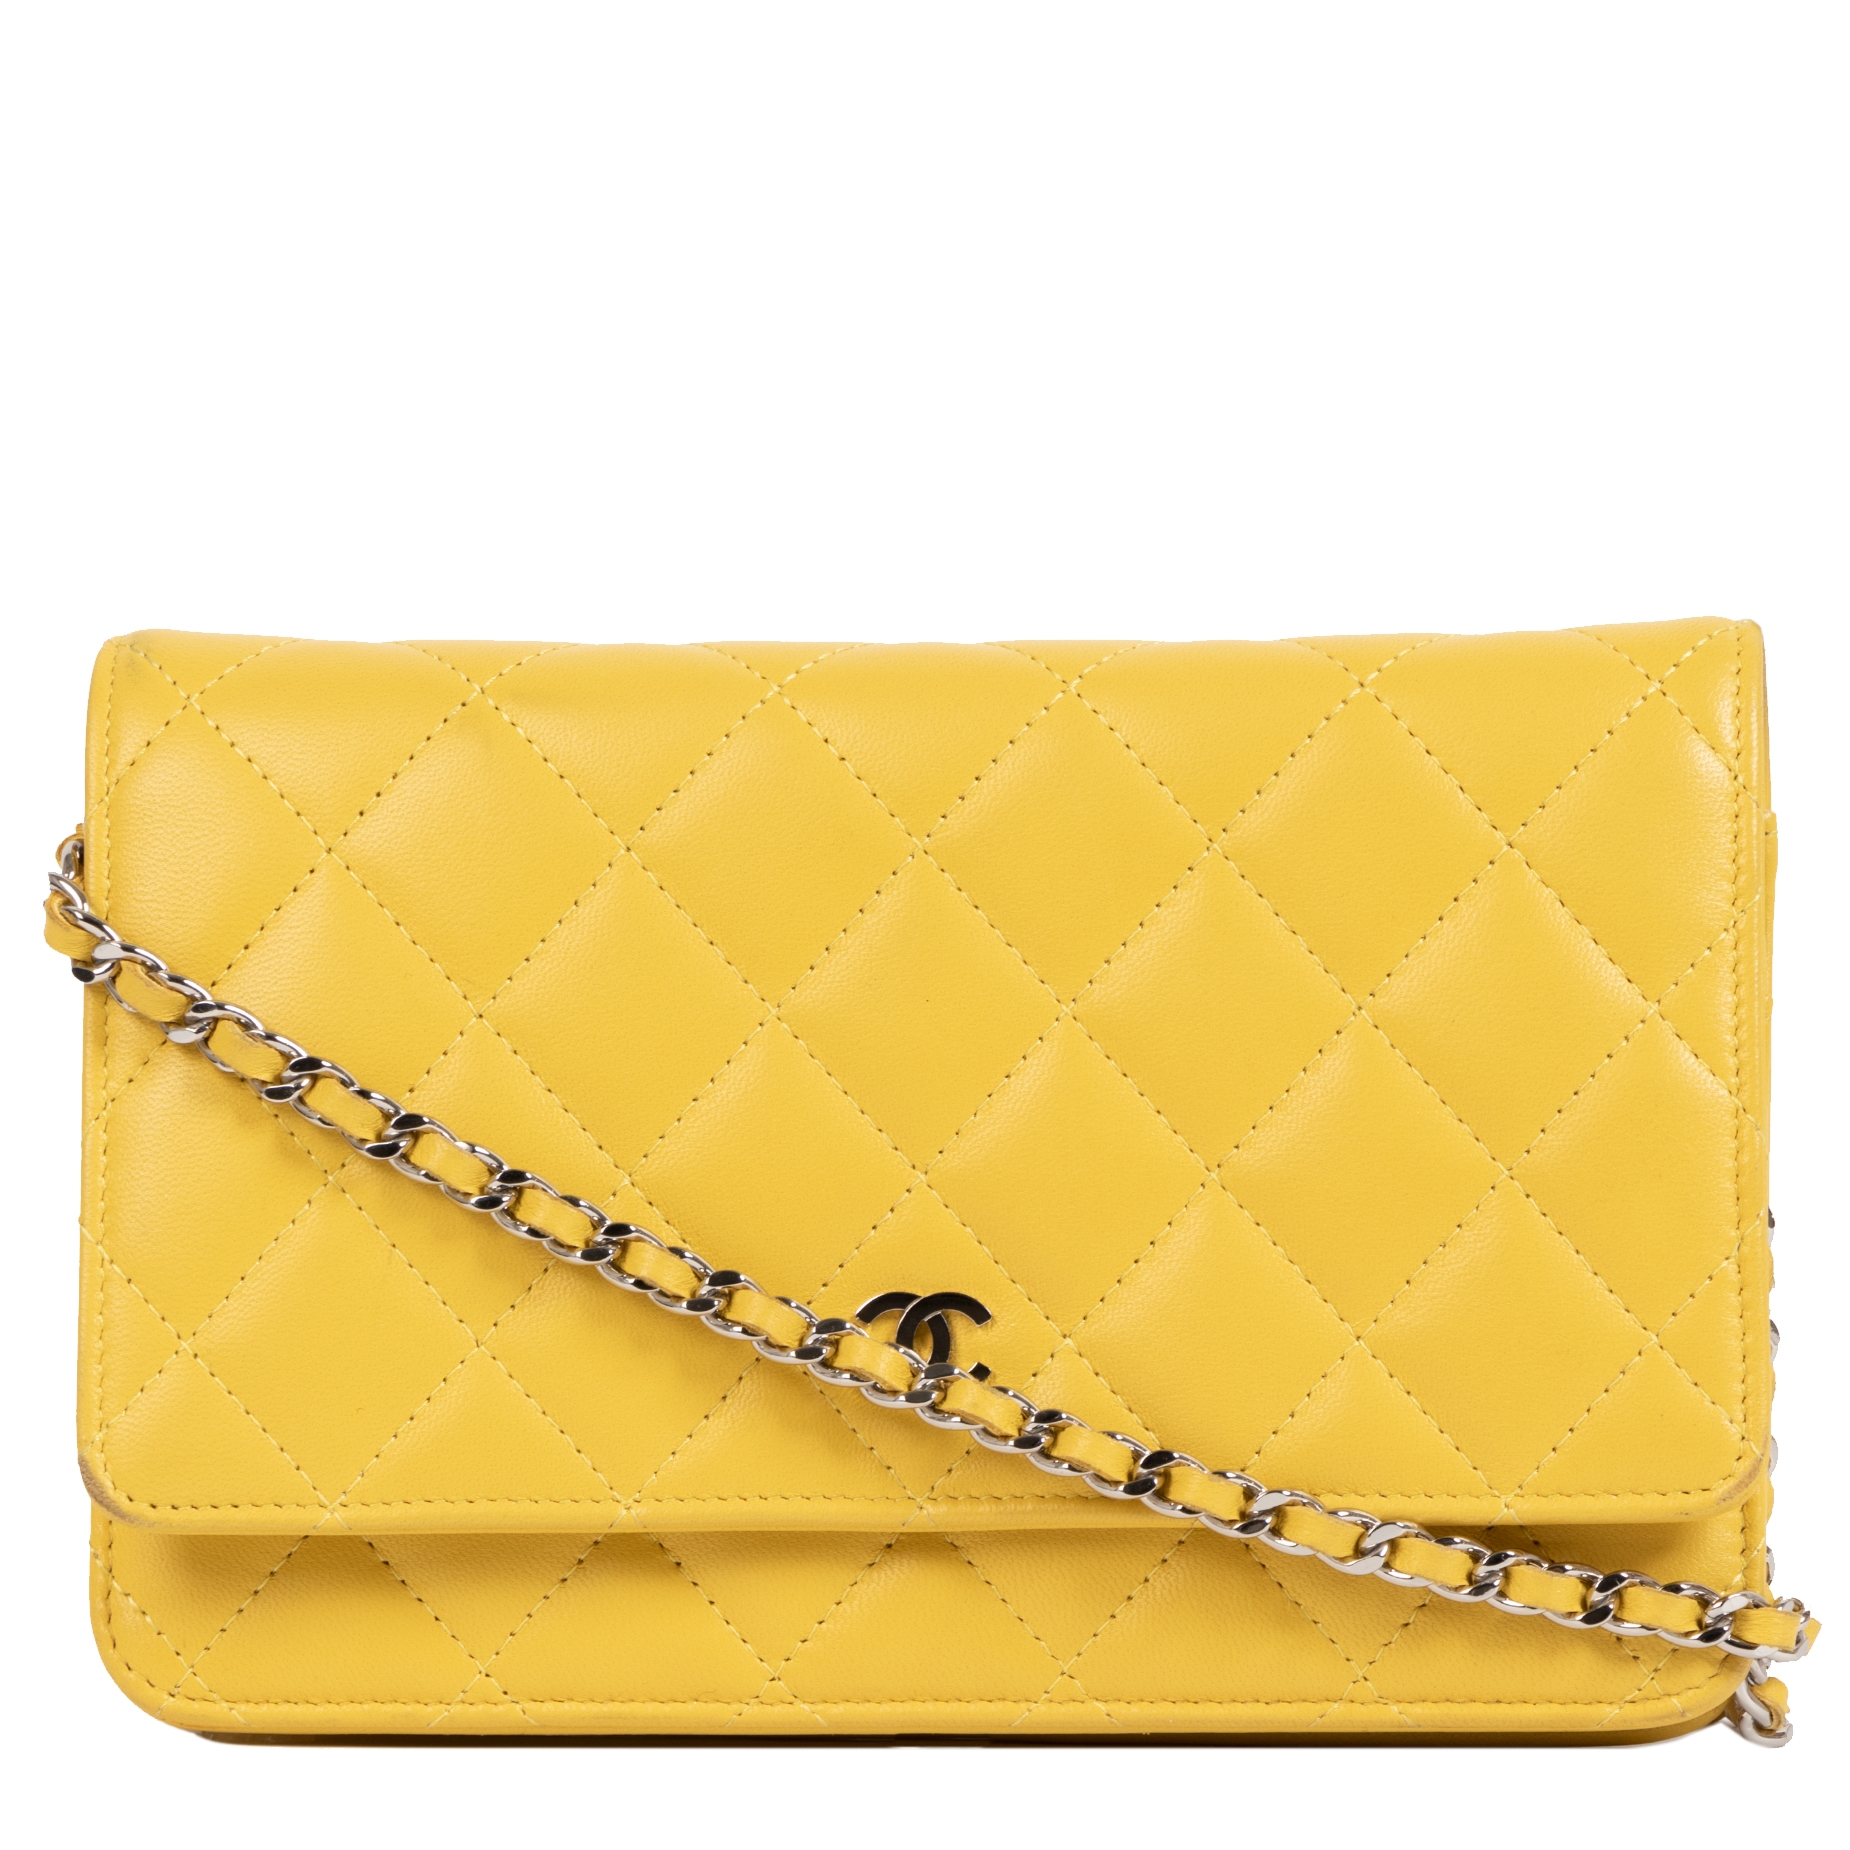 CHANEL #MCA186-35211 Long Yellow Leather Wallet – ALL YOUR BLISS